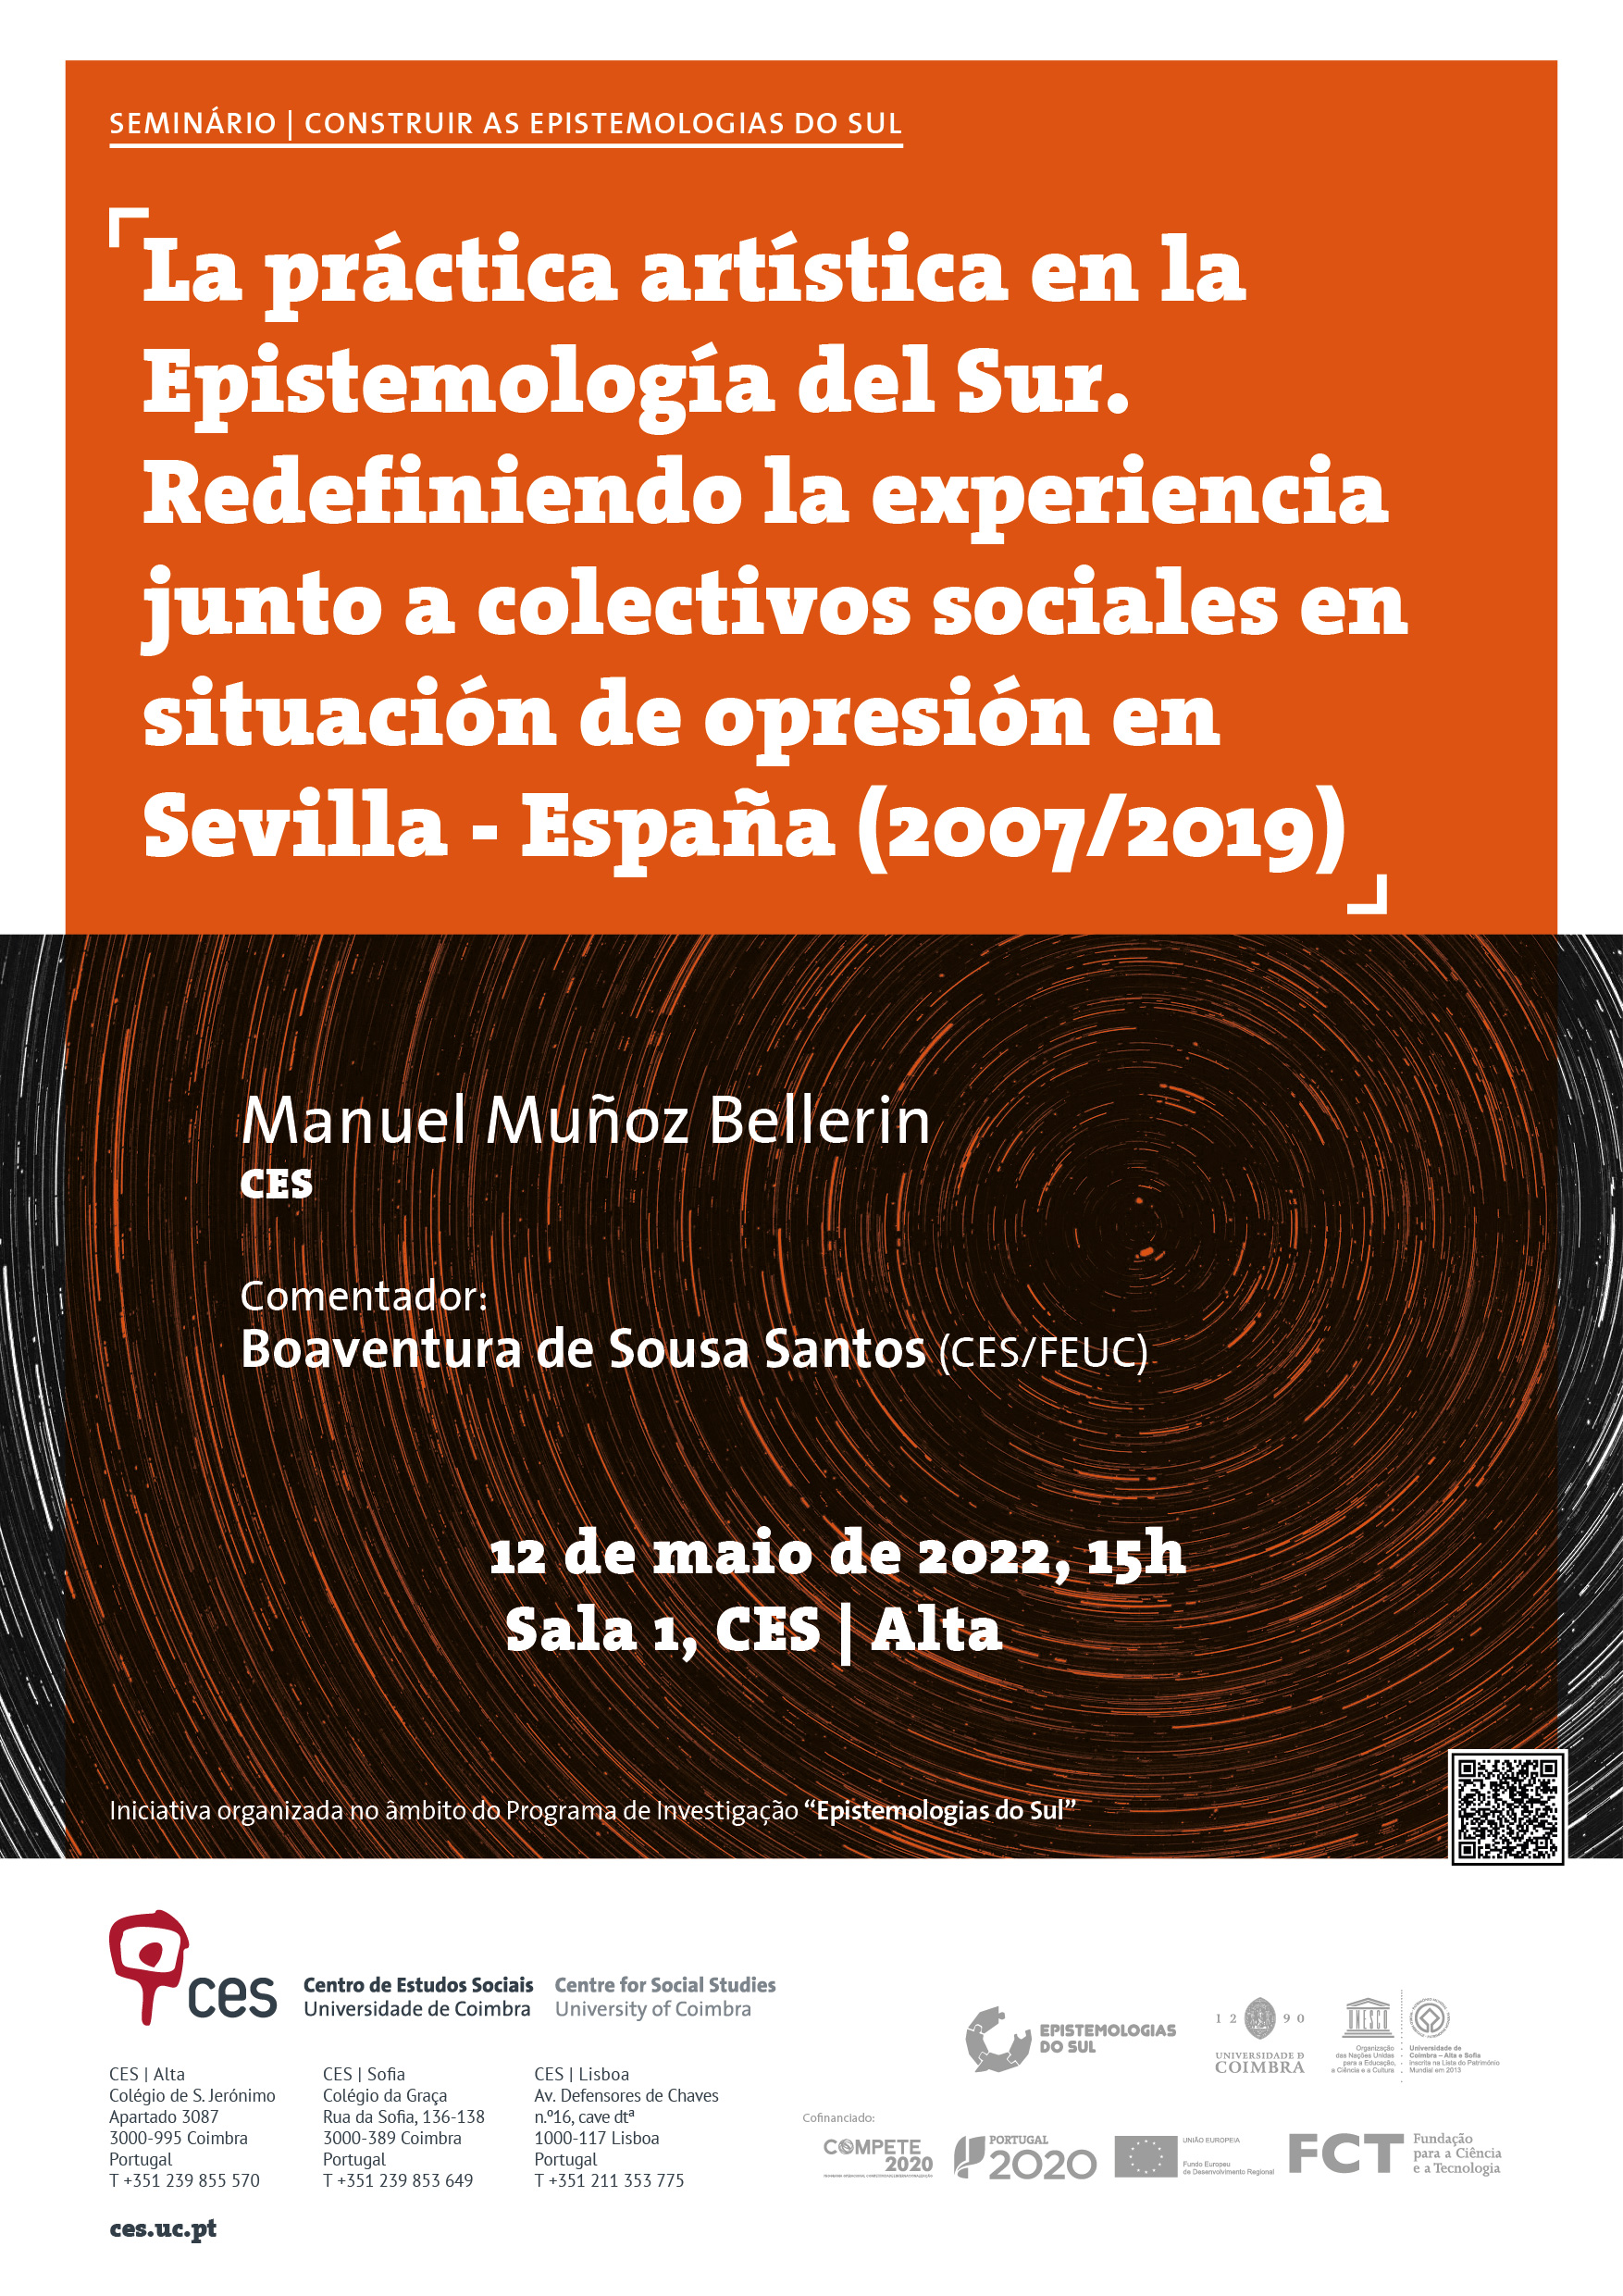 Artistic practice in the Epistemology of the South. Redefining the experience together with social collectives in a situation of oppression in Seville - Spain.(2007/2019)<span id="edit_38630"><script>$(function() { $('#edit_38630').load( "/myces/user/editobj.php?tipo=evento&id=38630" ); });</script></span>